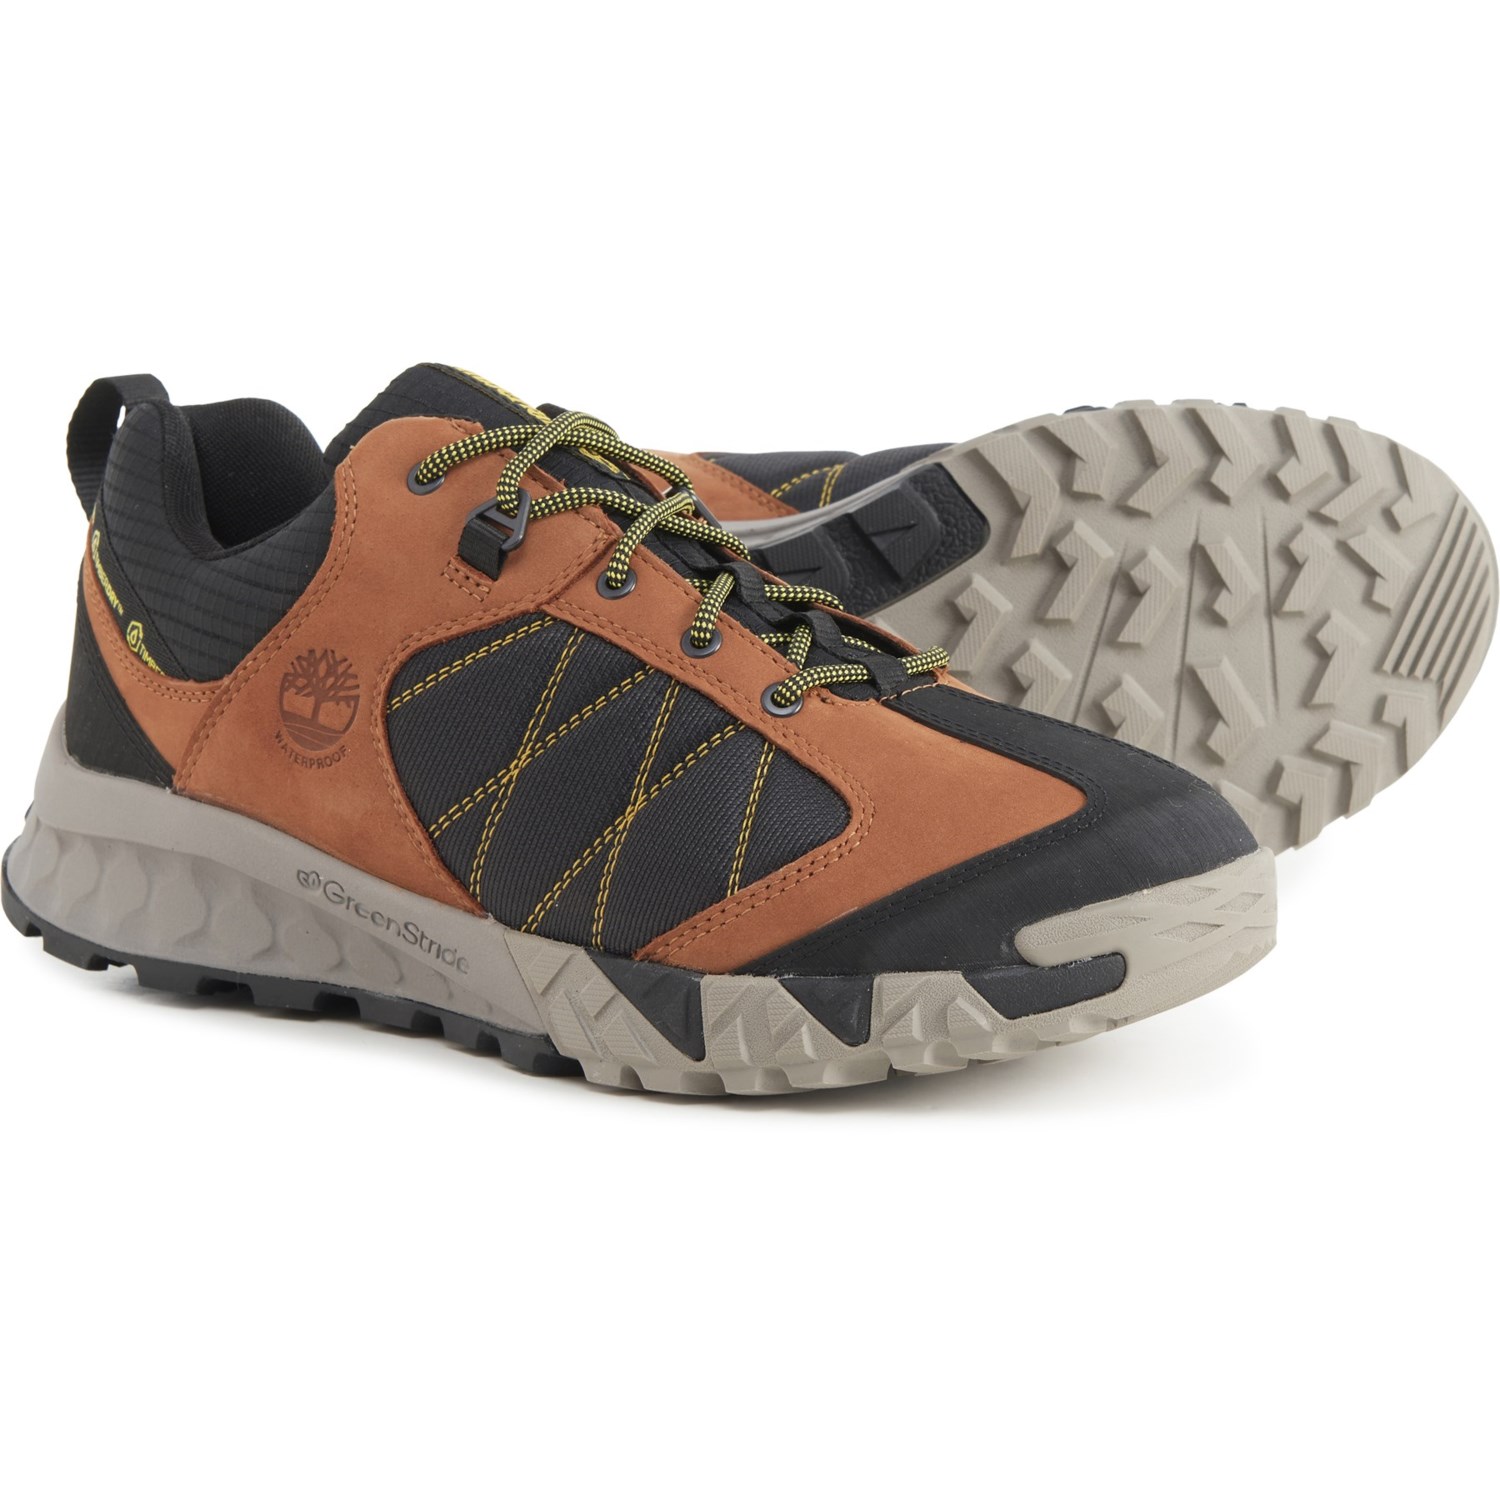 Hong Kong dilema Restricciones Timberland Trailquest Low Hiking Shoes (For Men) - Save 50%